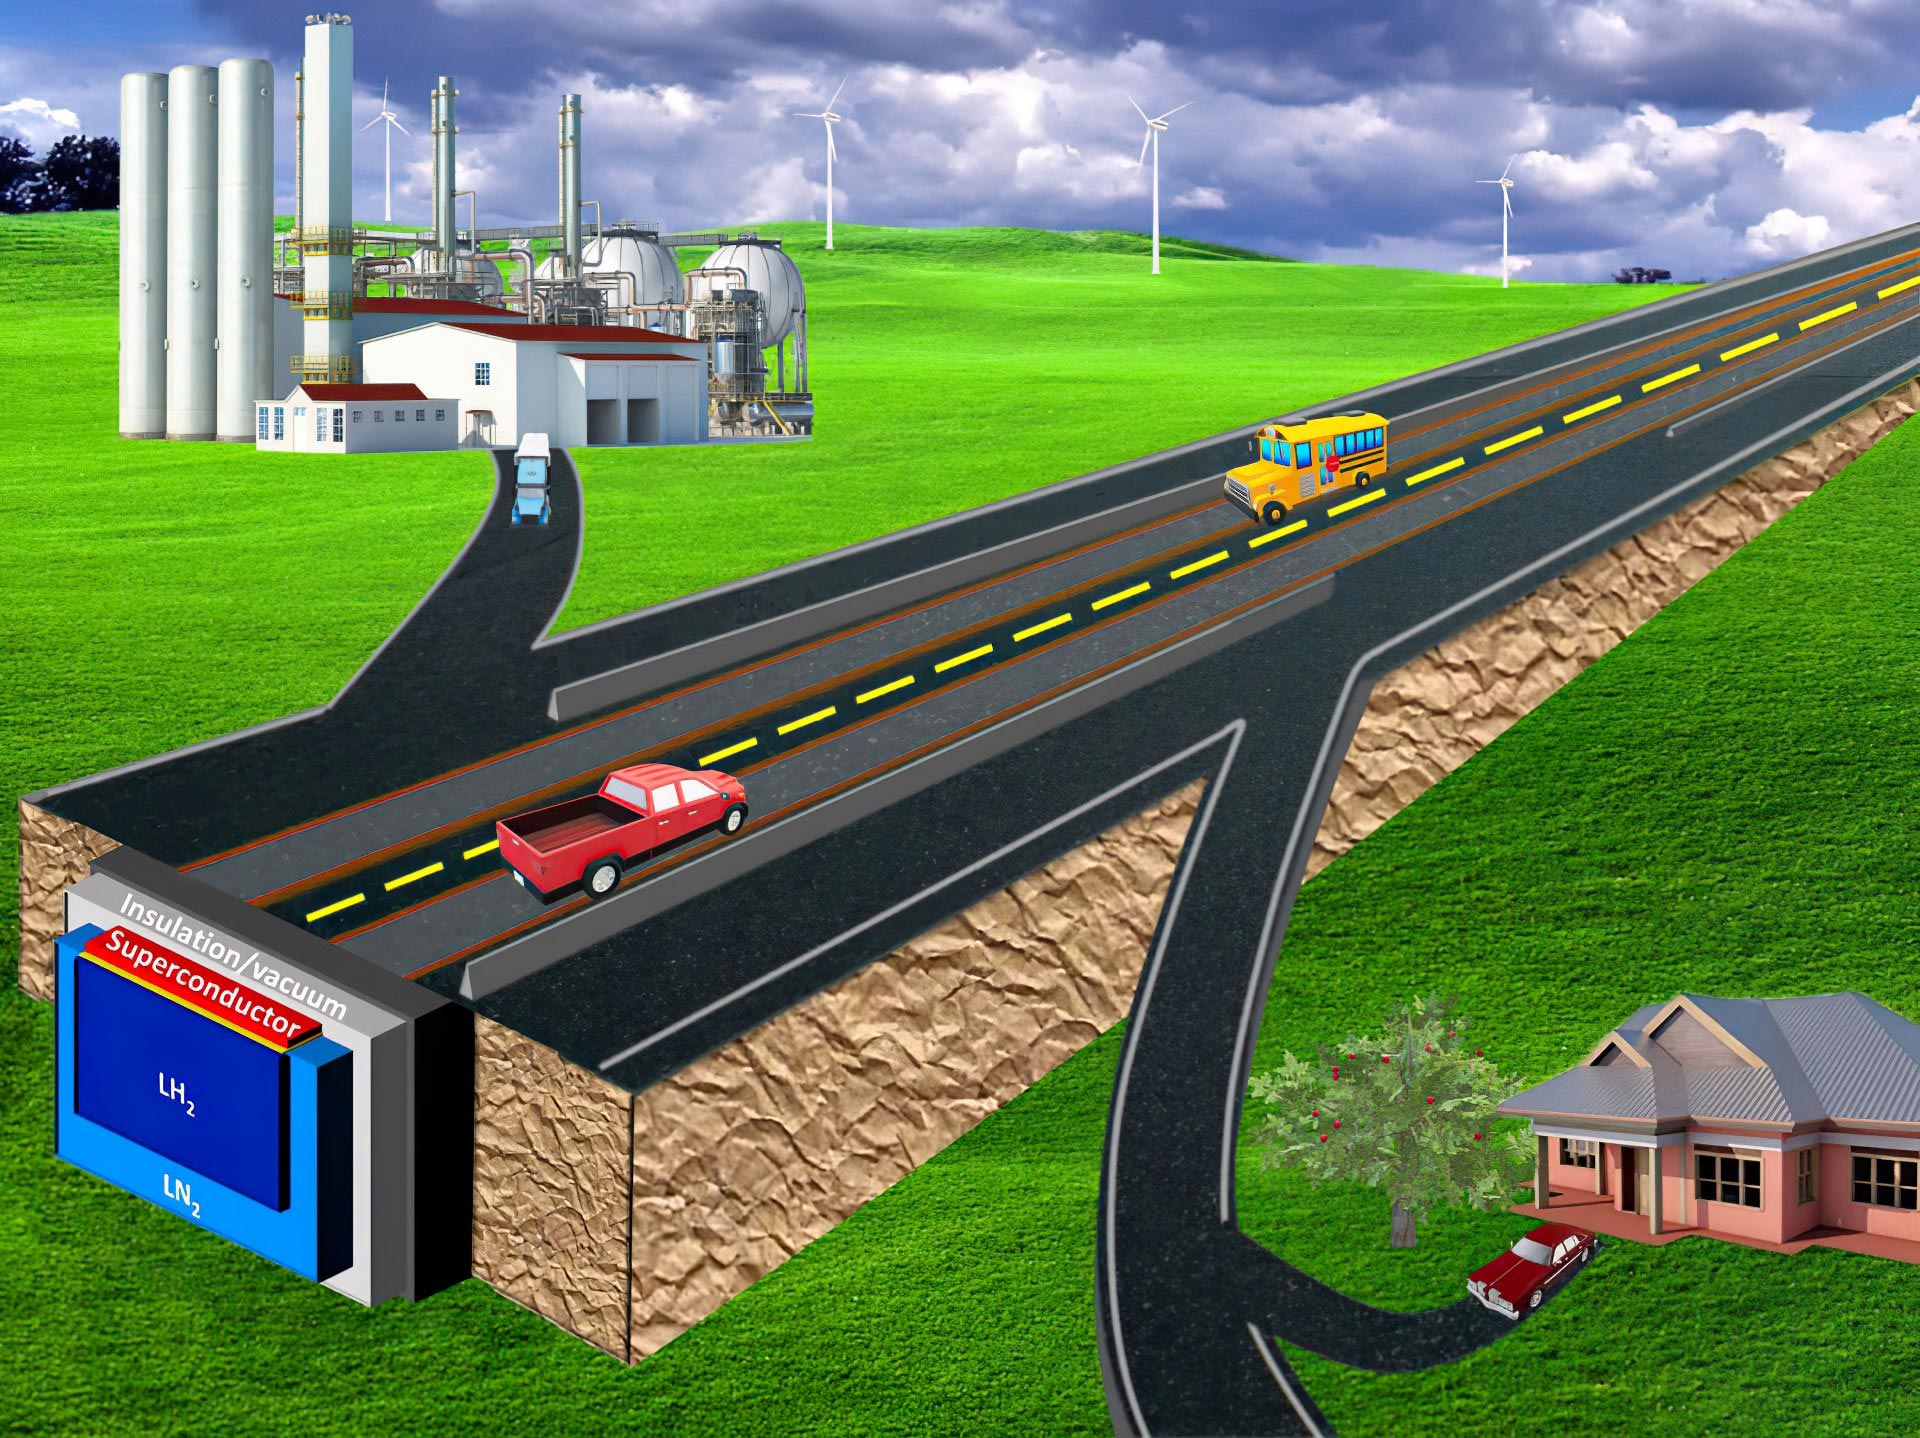 Superconducting Highway for Energy Transport and Storage Schematic